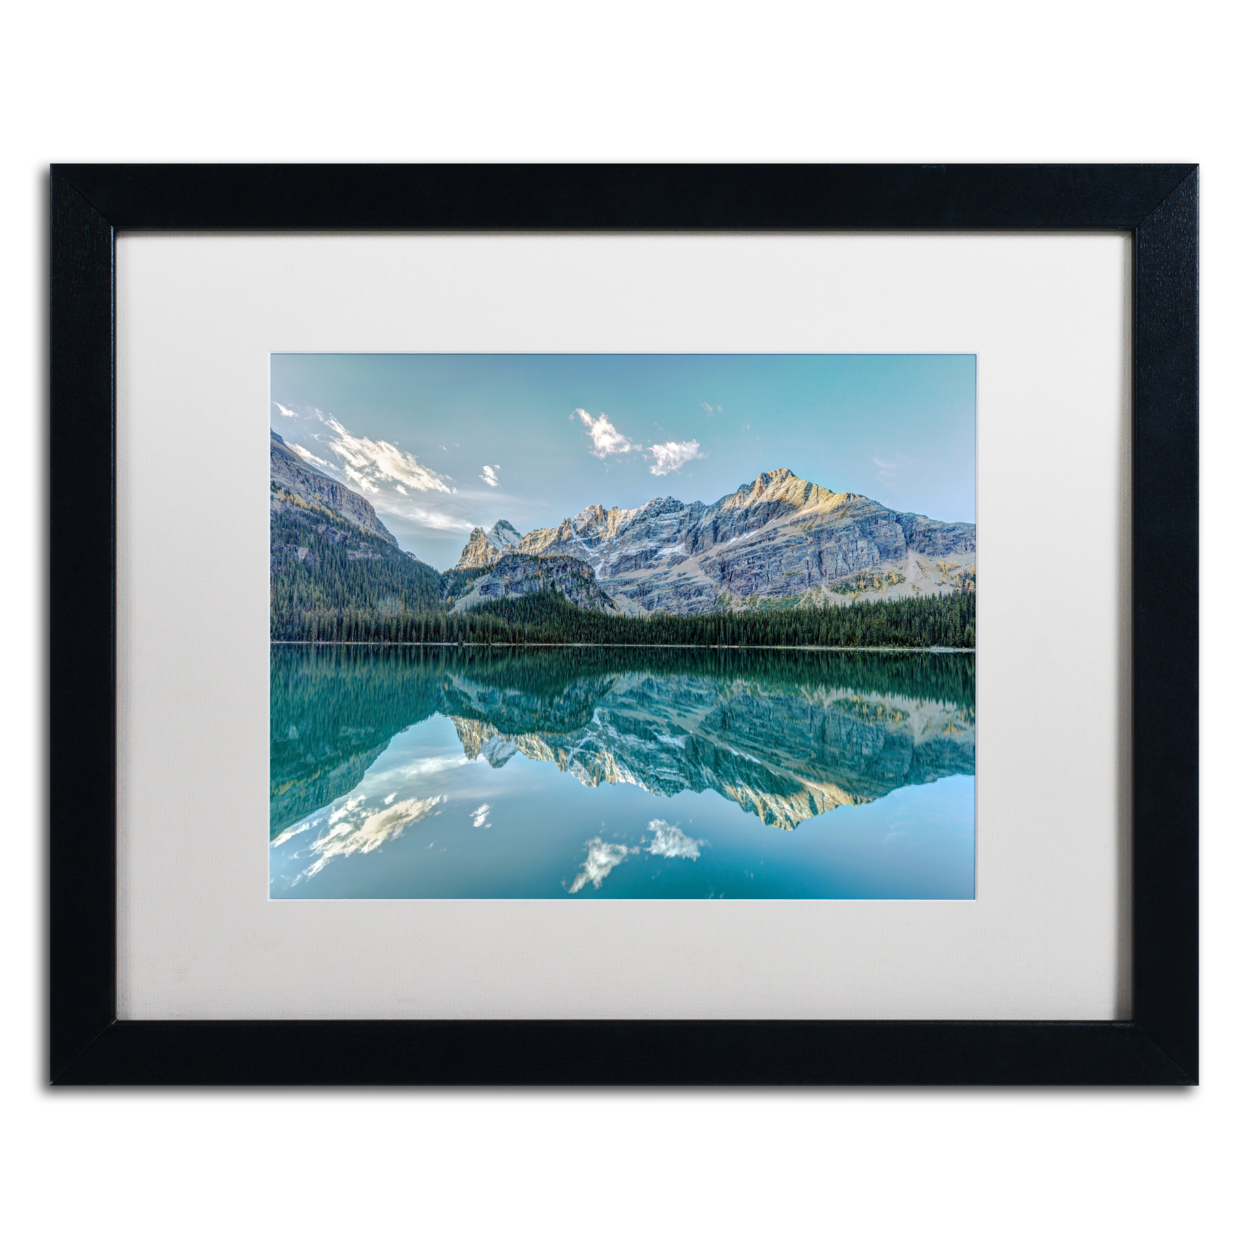 Pierre Leclerc 'O'Hara Lake Reflections At Dawn' Black Wooden Framed Art 18 X 22 Inches